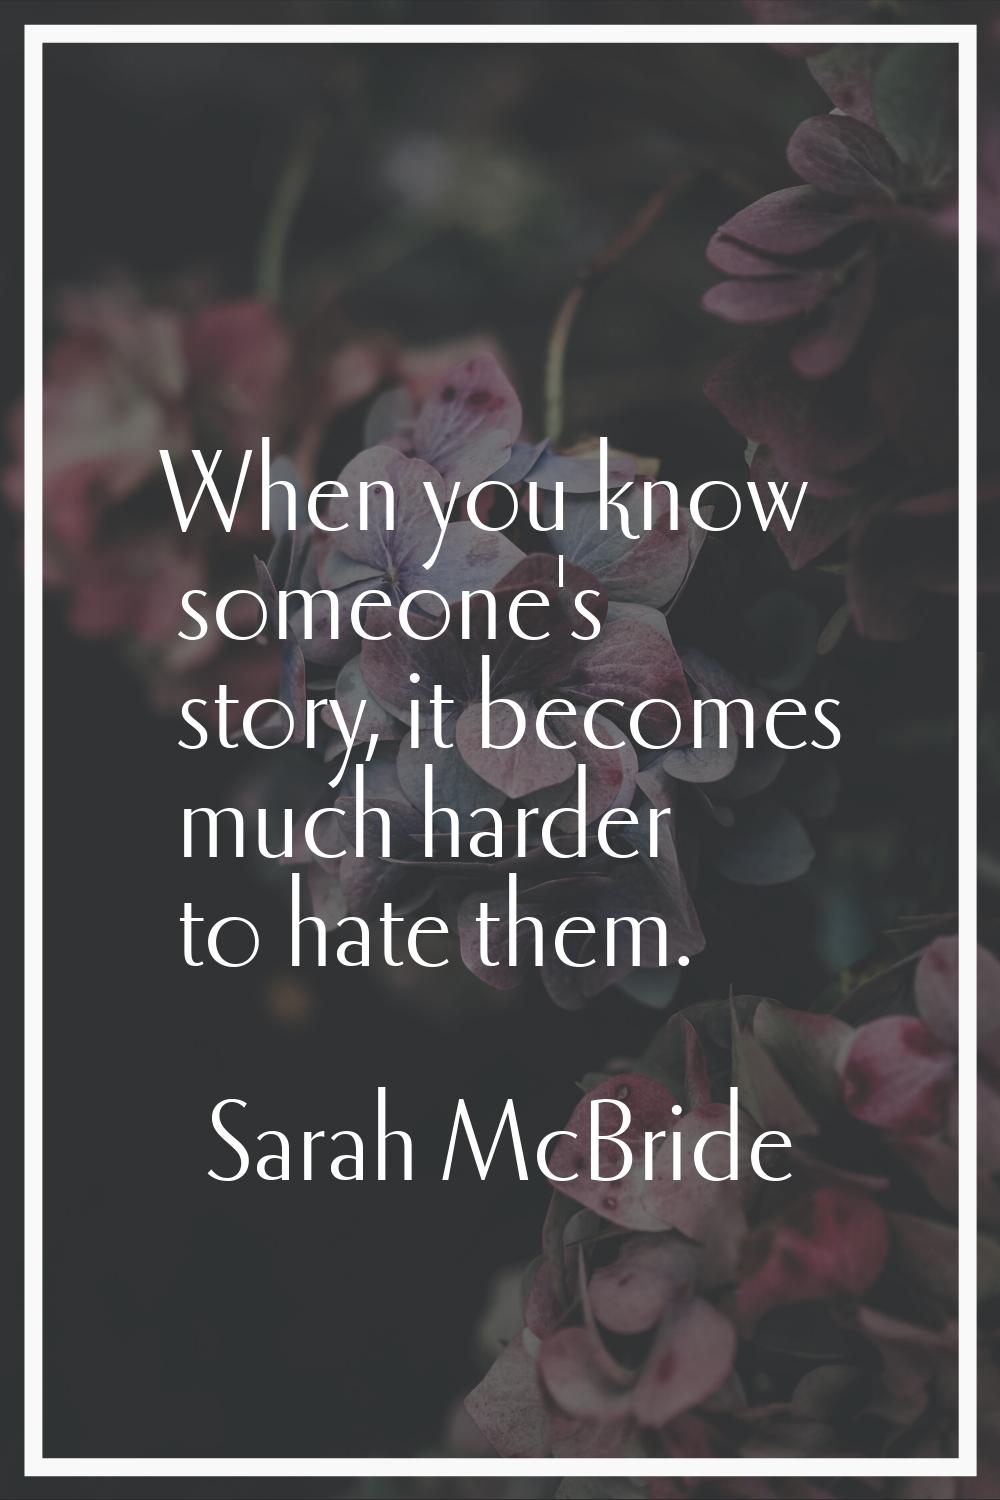 When you know someone's story, it becomes much harder to hate them.